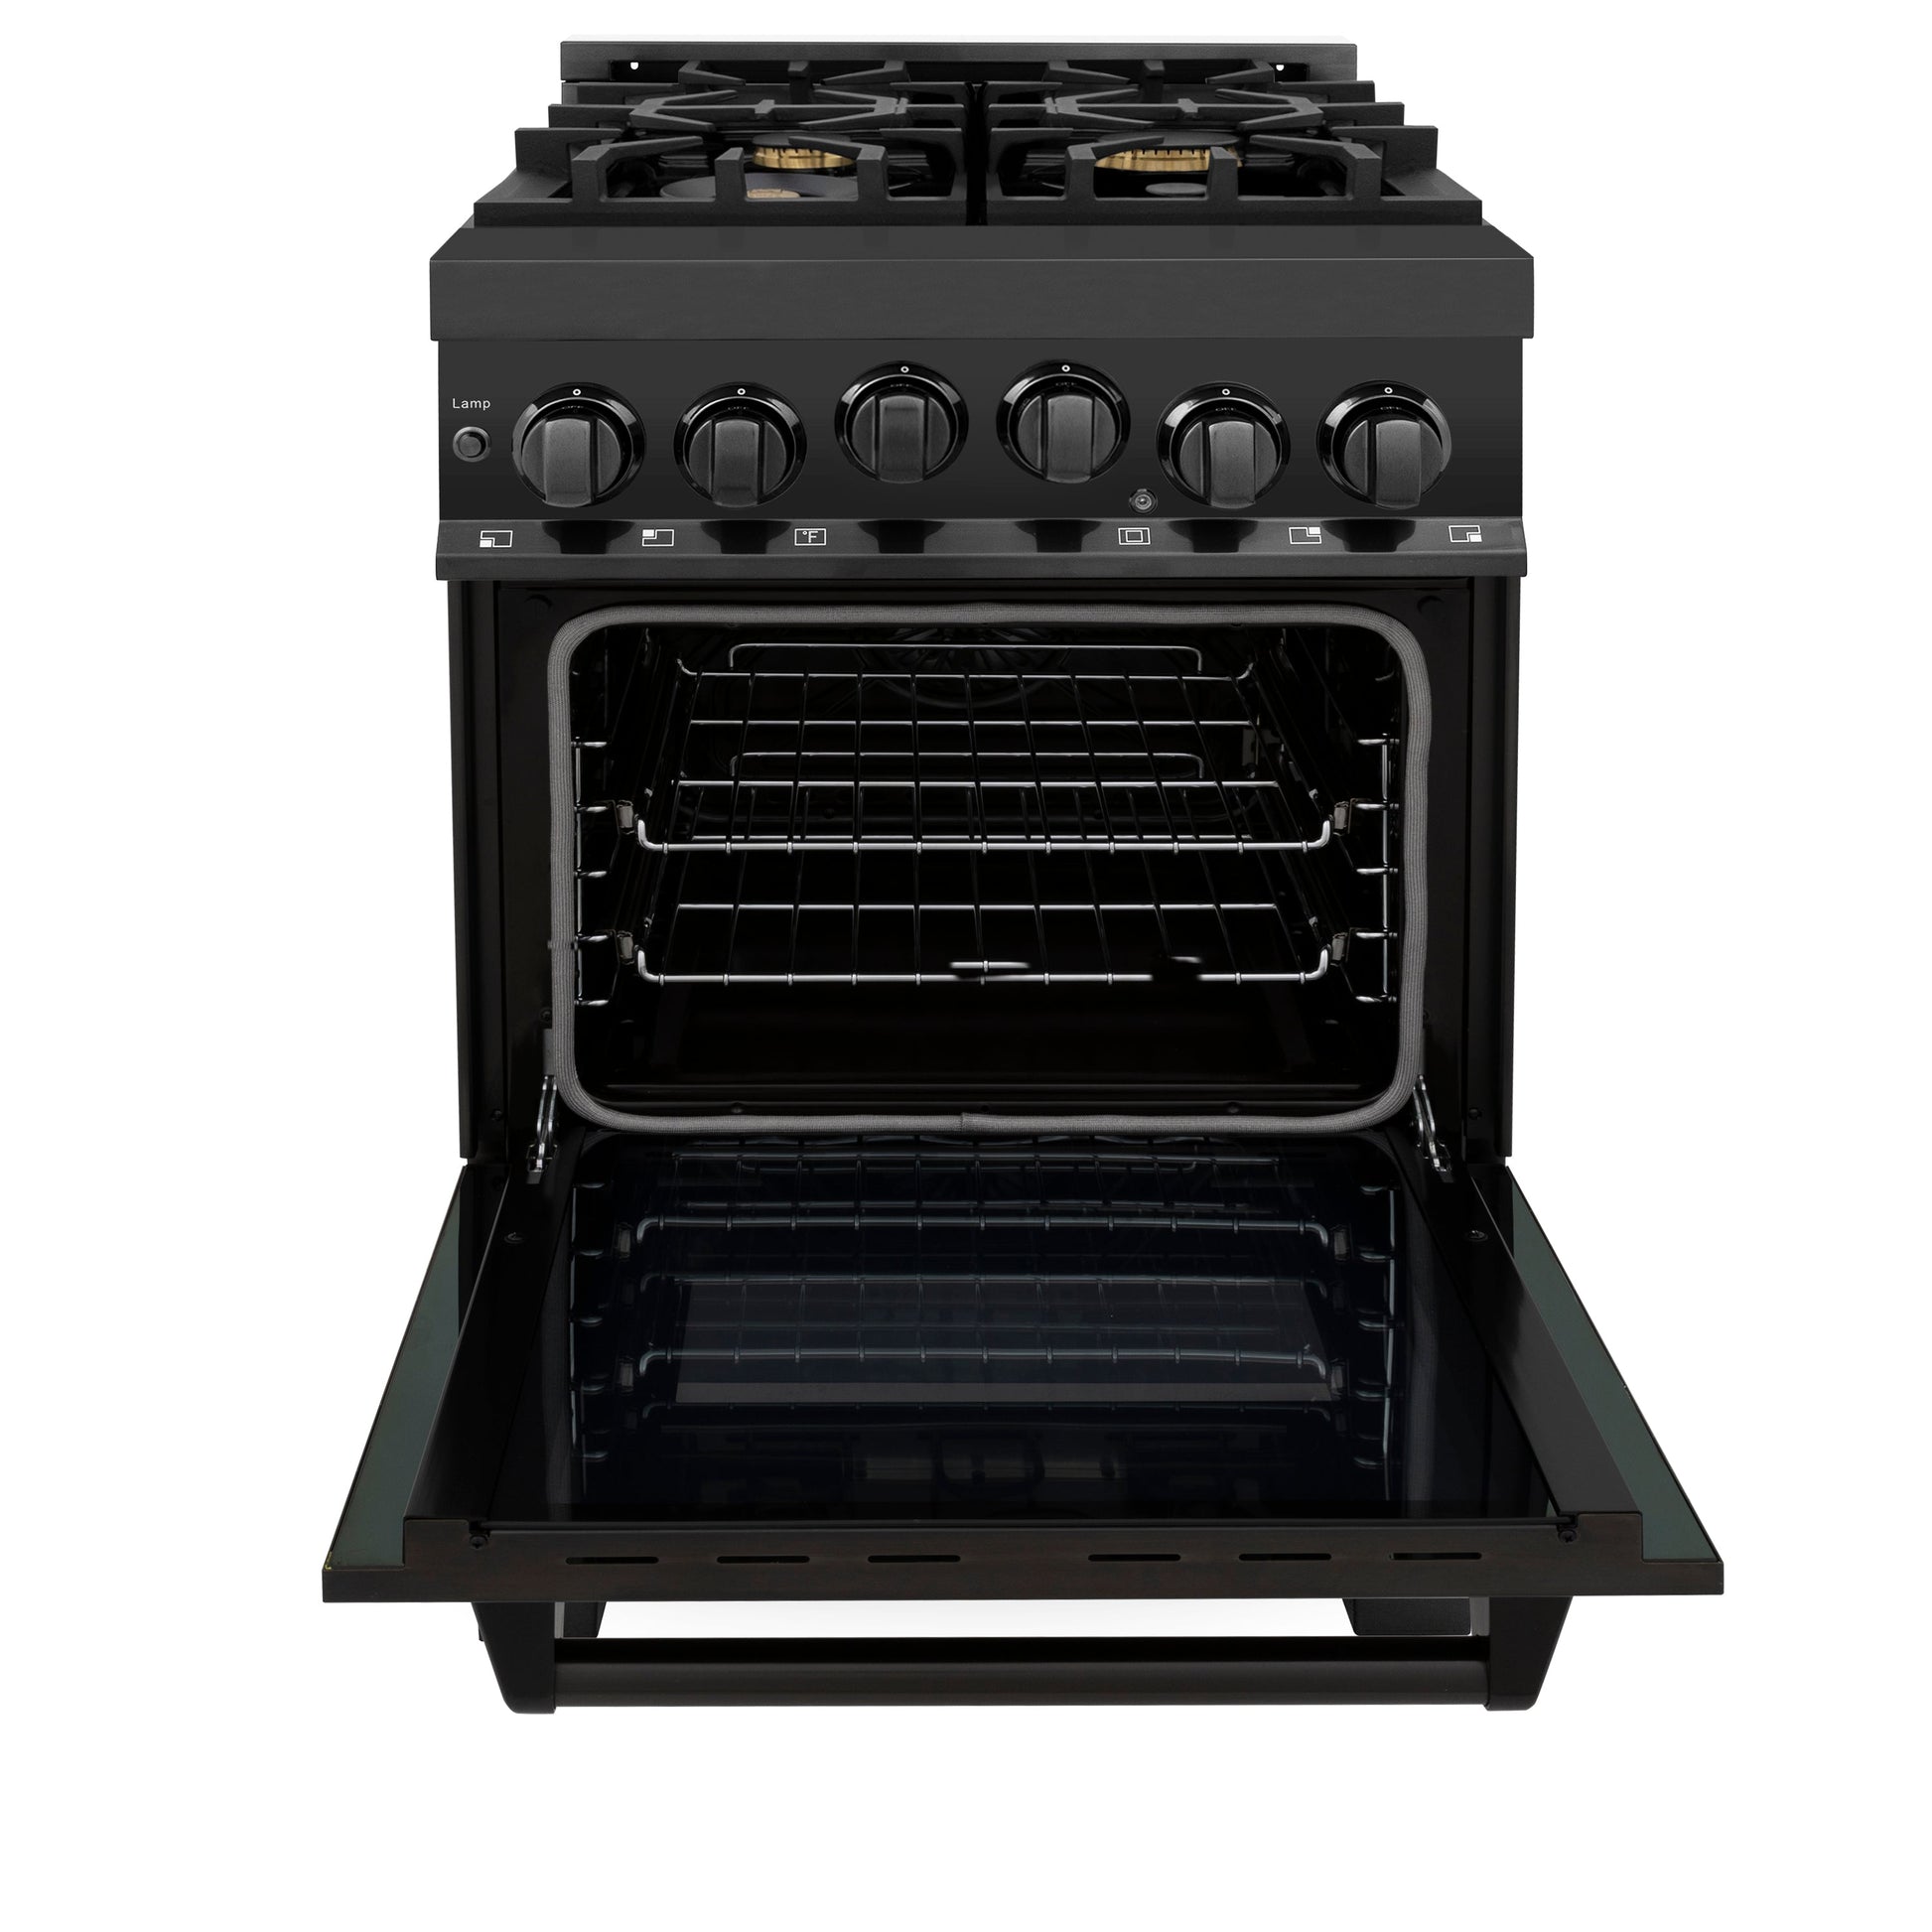 ZLINE 24" Range with Gas Stove and Oven - Black Stainless Steel